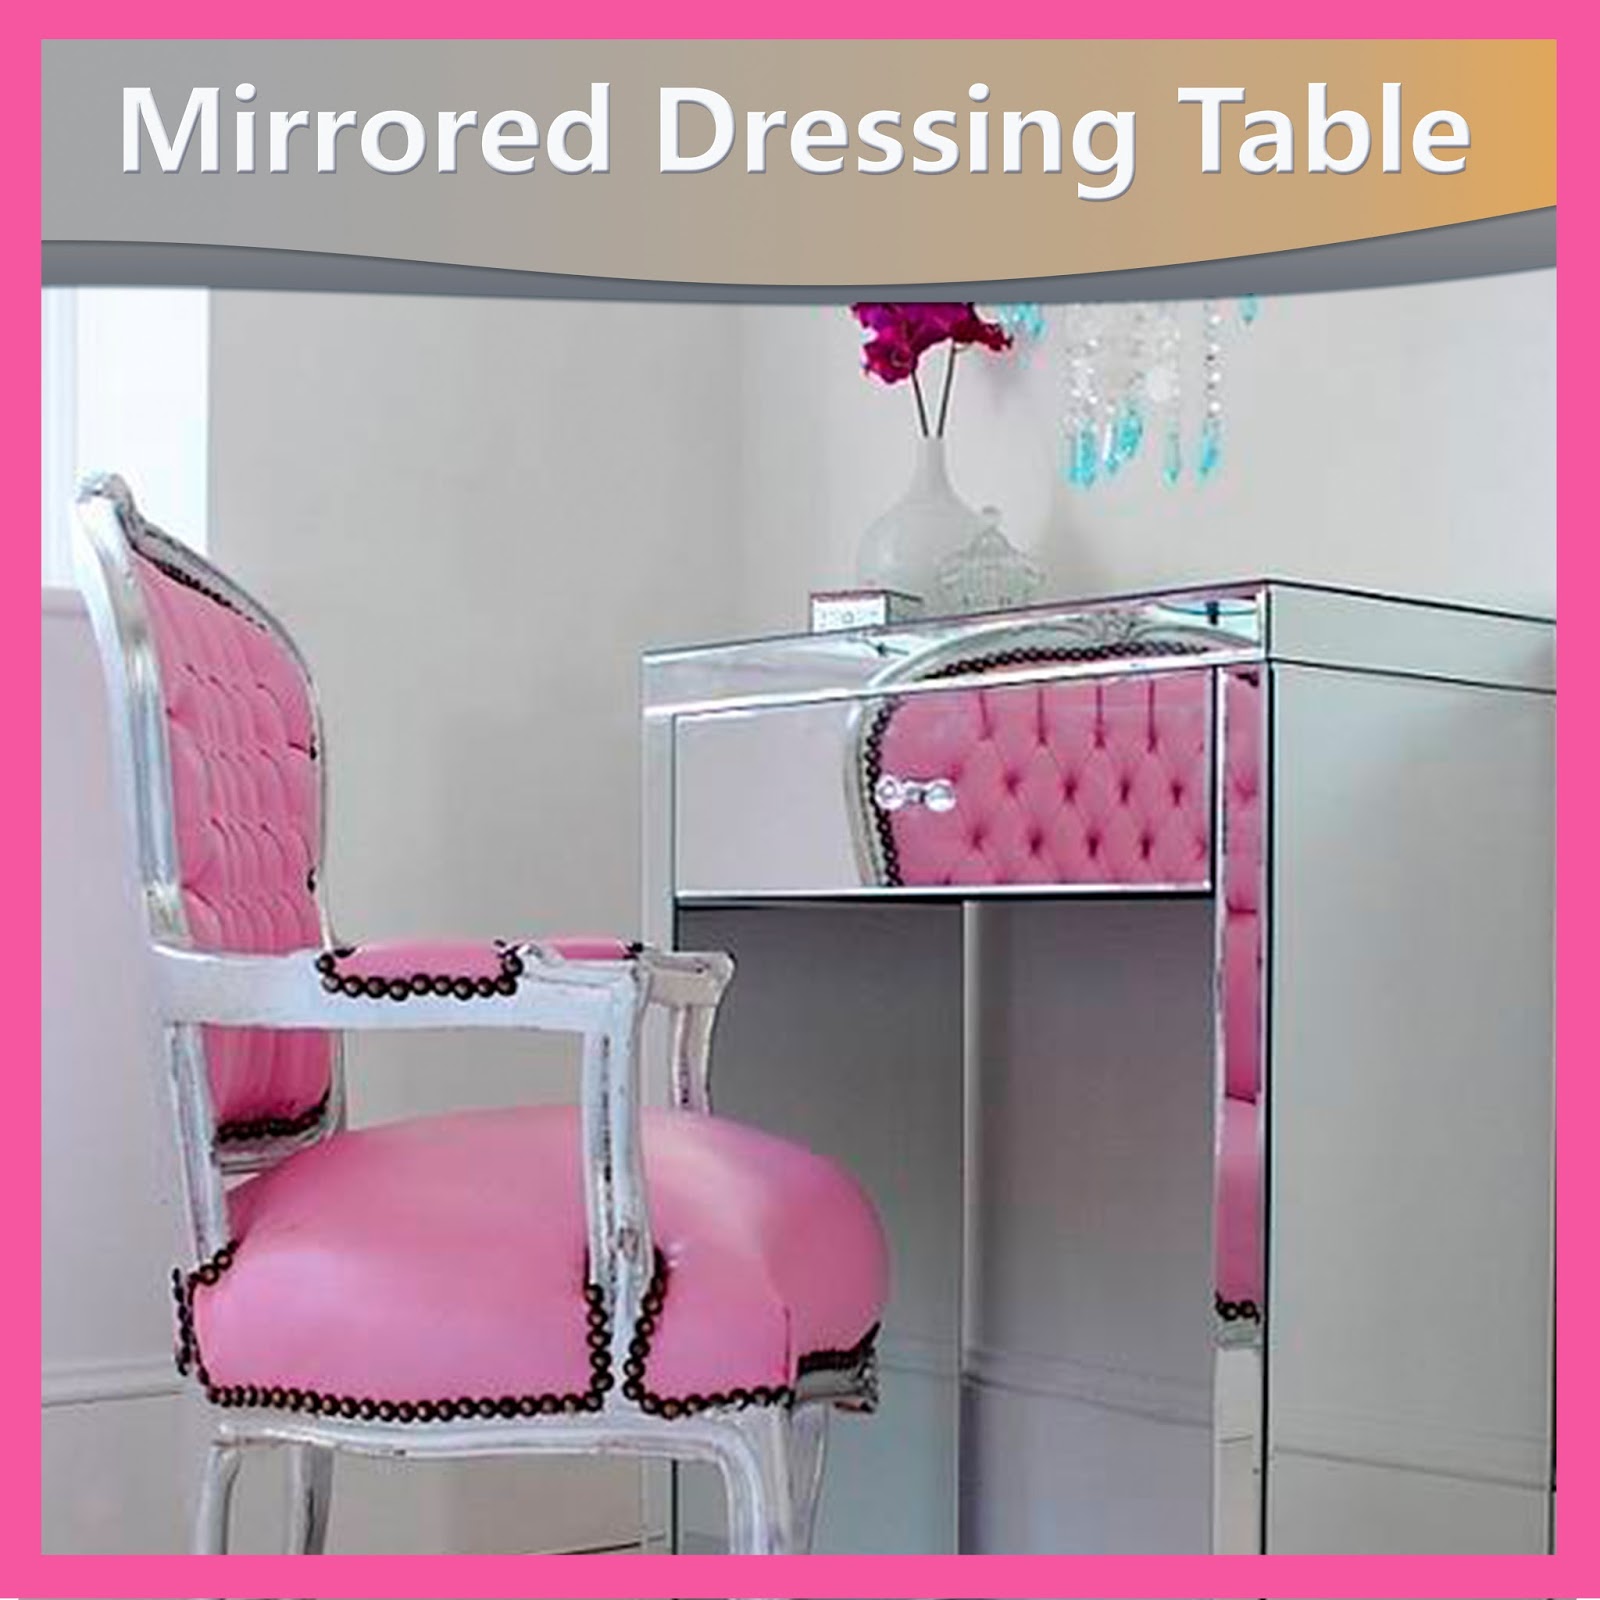 Mirrored Dressing Table | ARTLOOK GLASS COMPANY NEW YORK